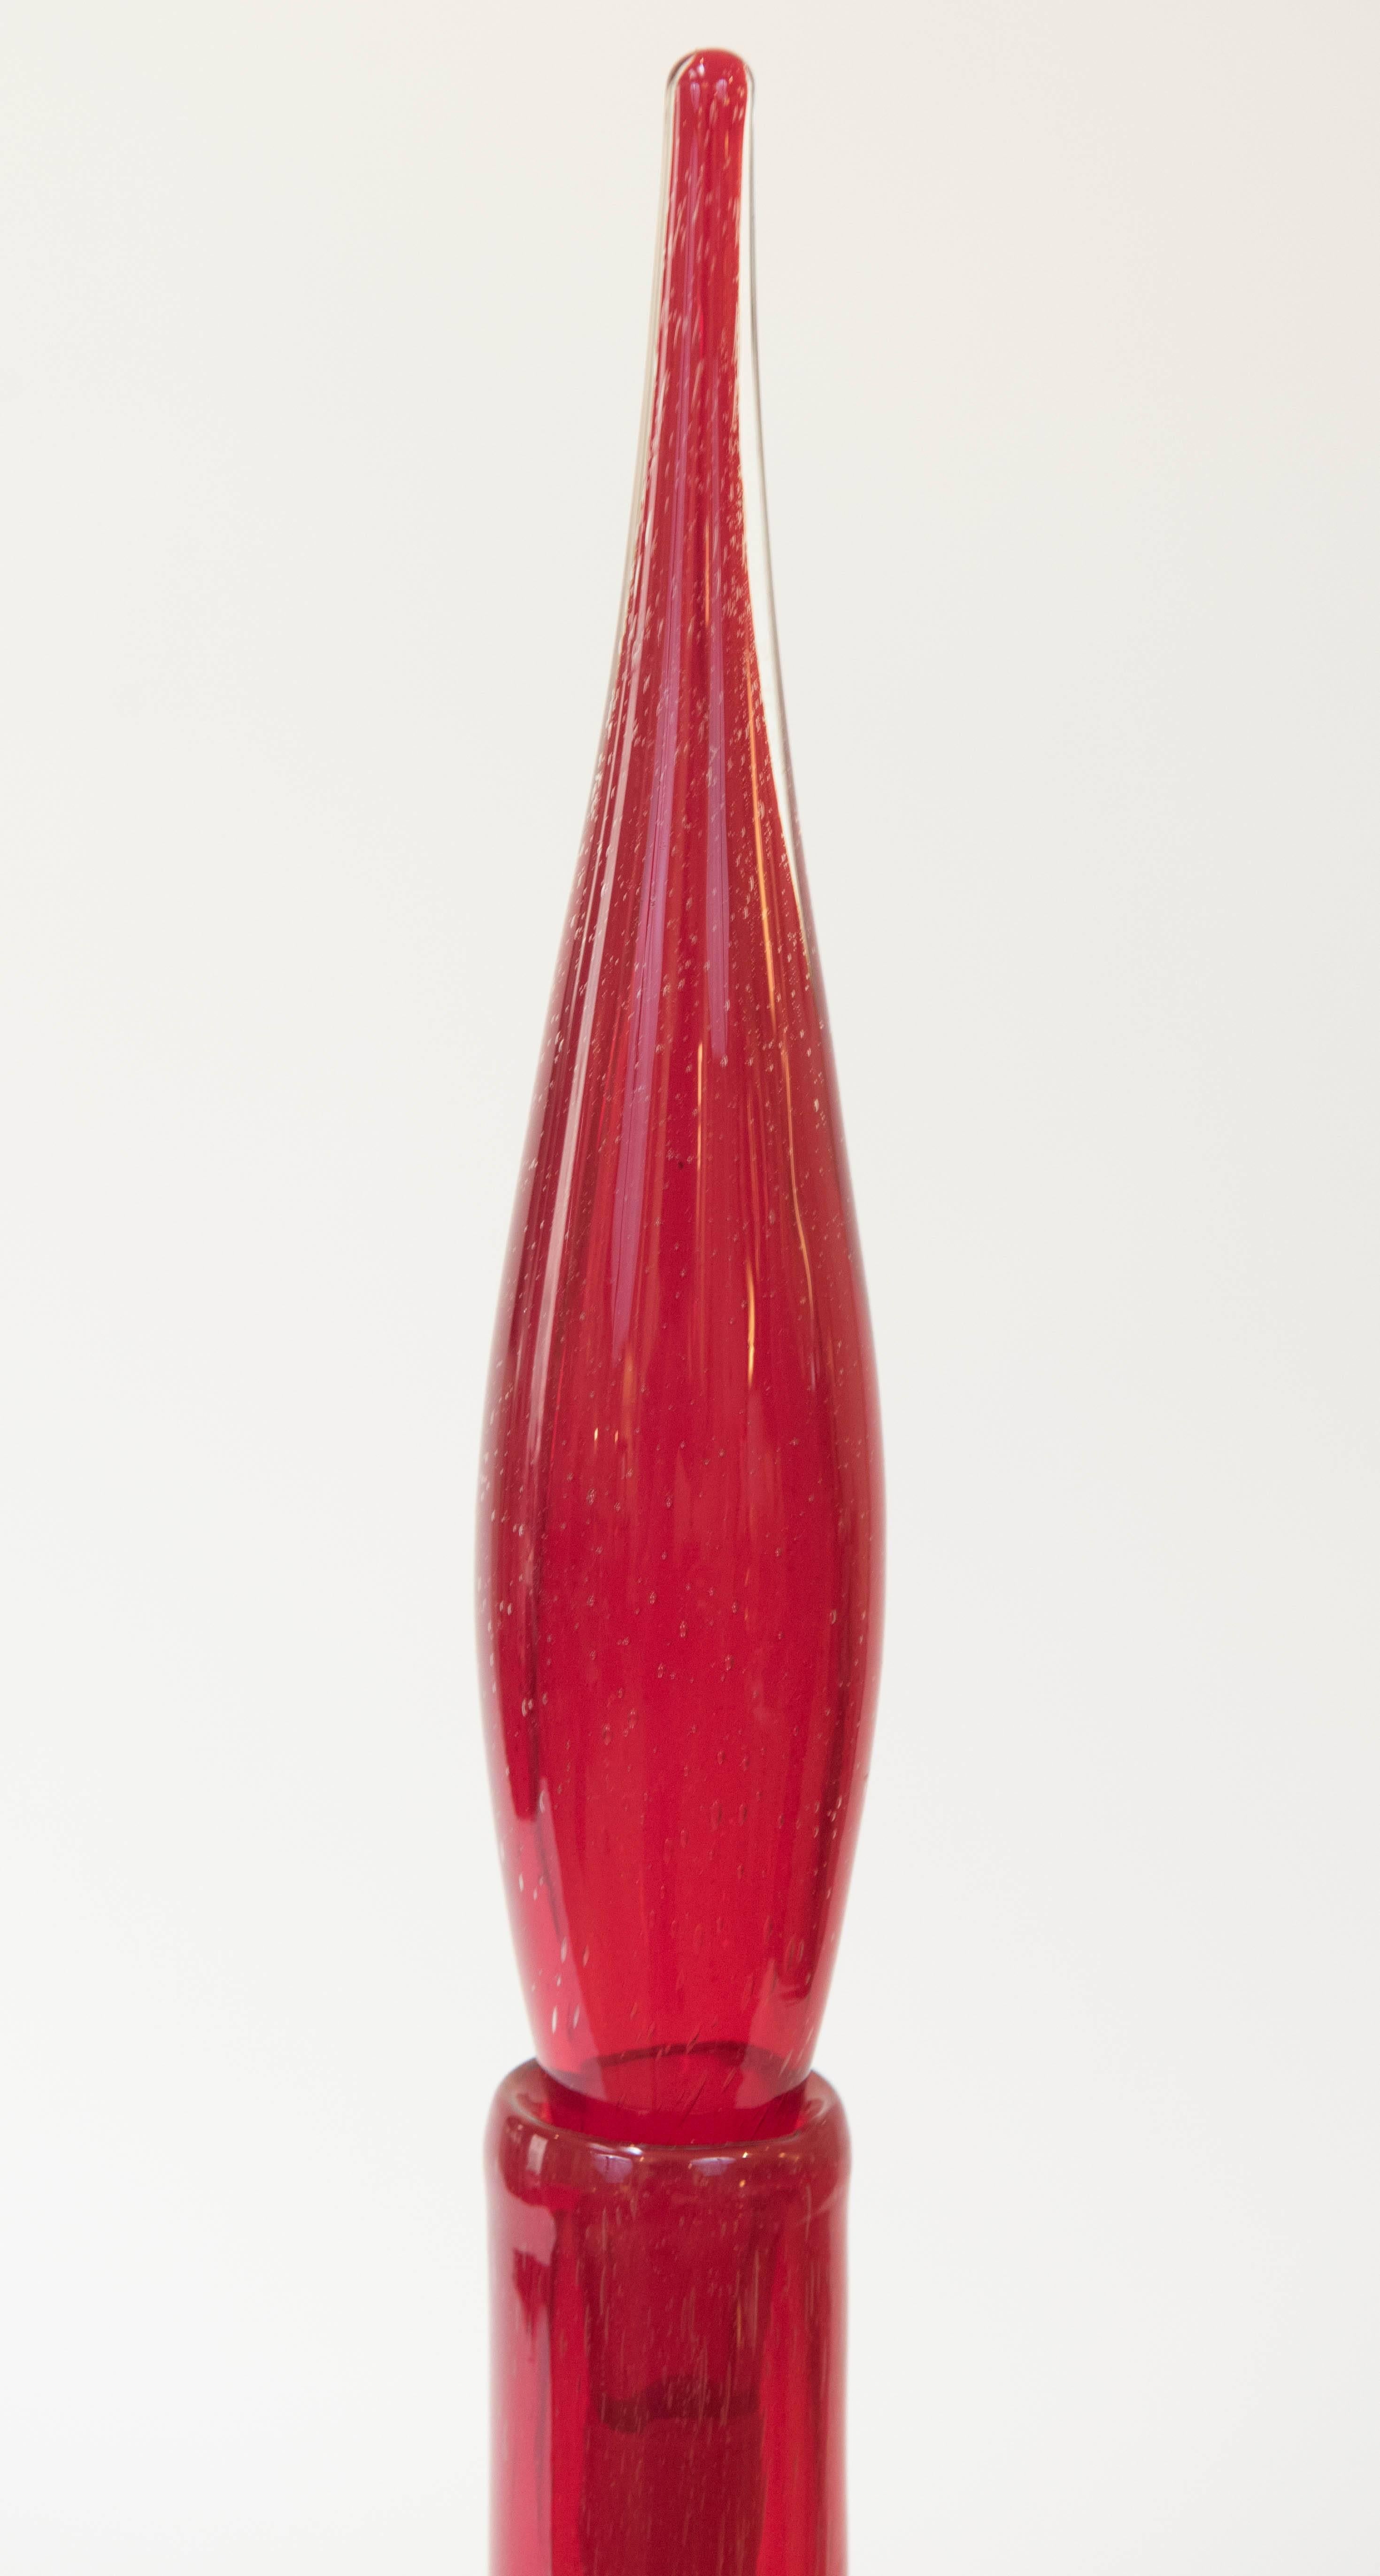 A rare and interesting shaped flaming red glass decanter with an elongated stopper.